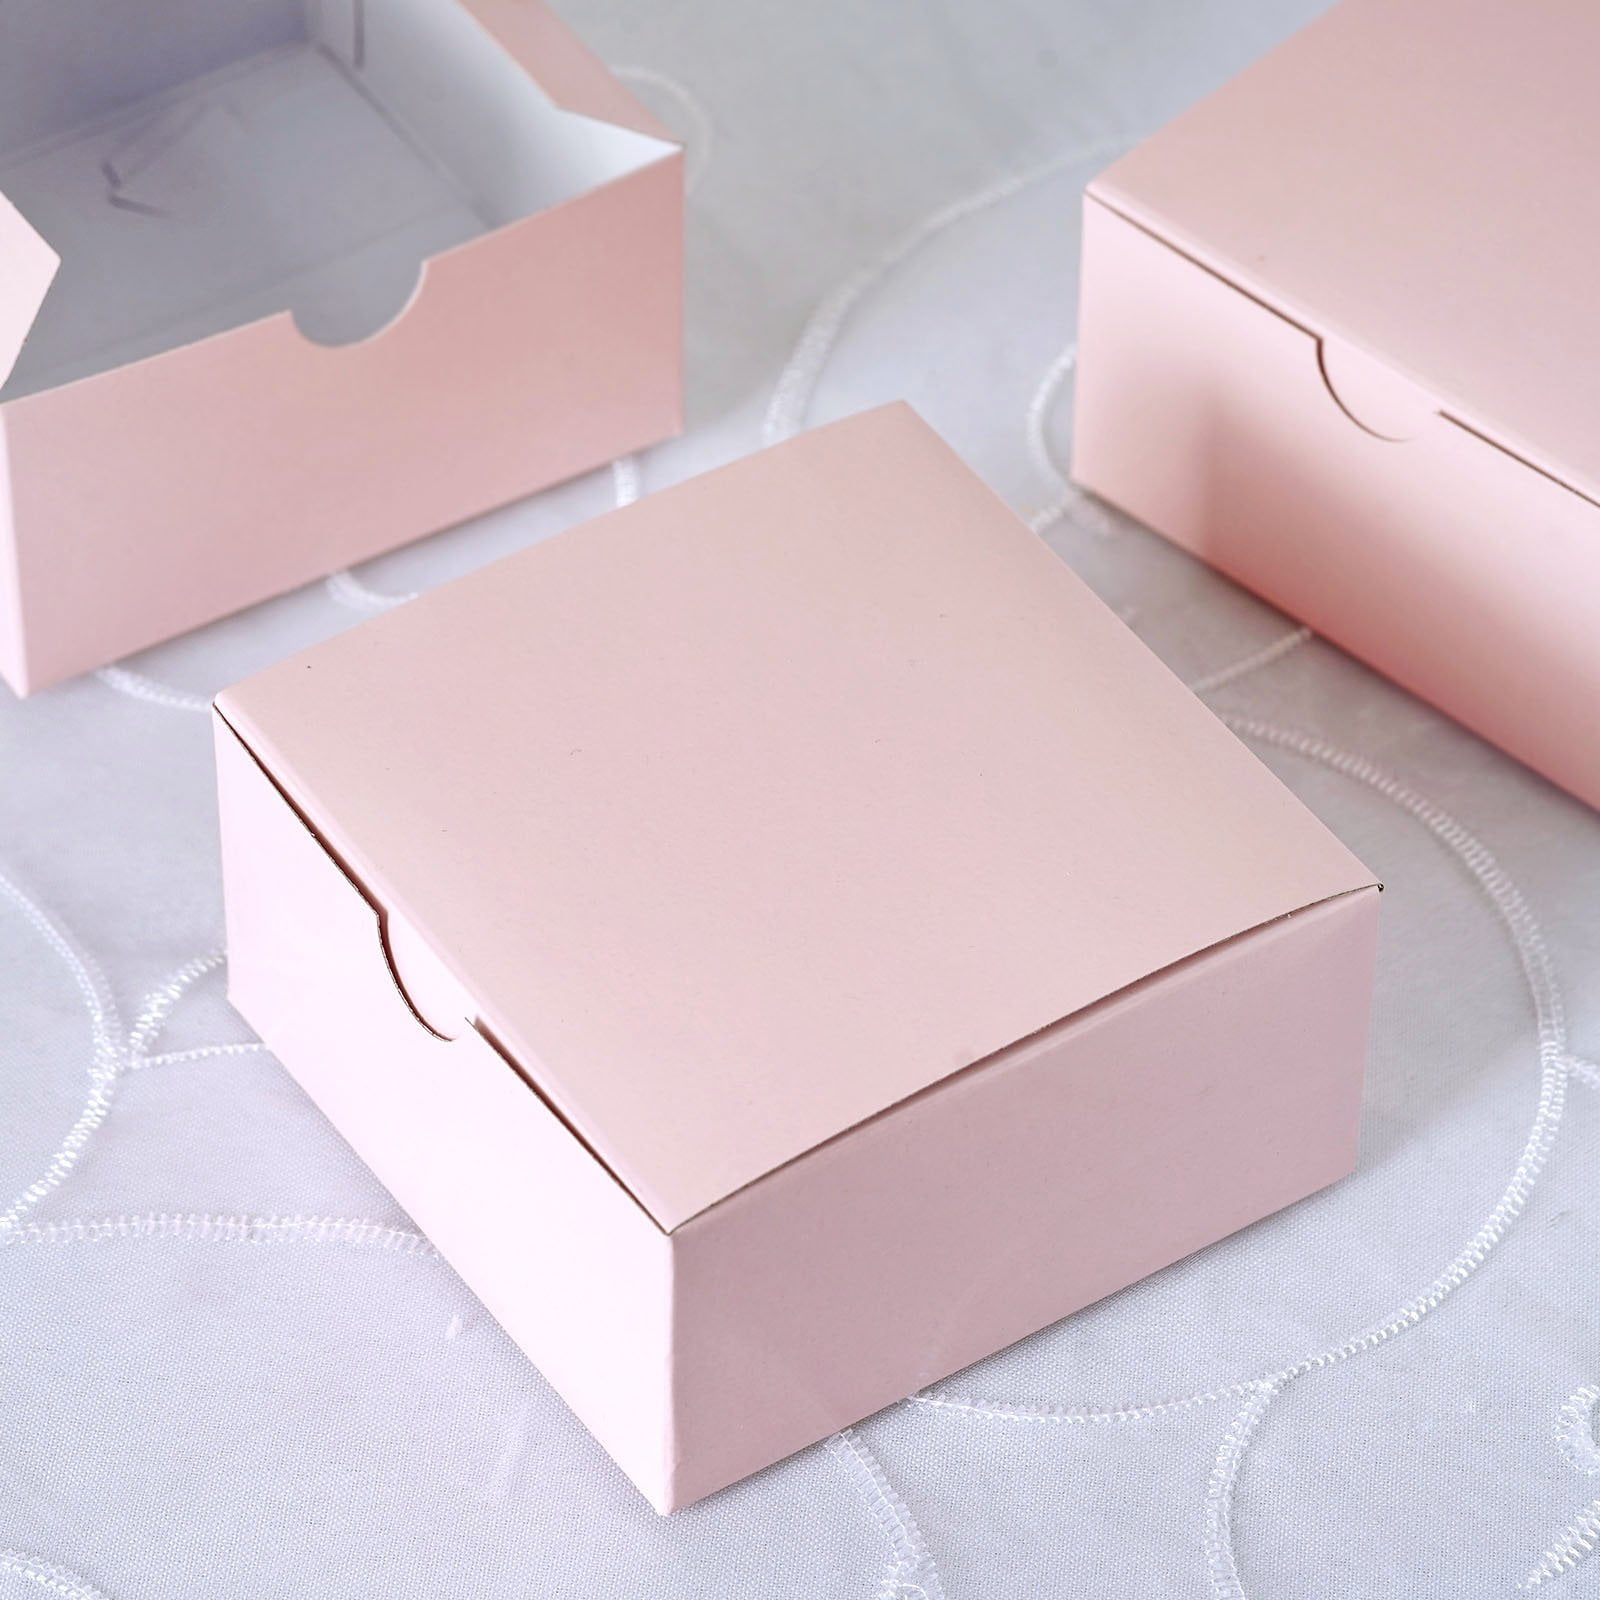 Efavormart 4x4x2 Cake Box for Candy Treat Gift Wrap Box